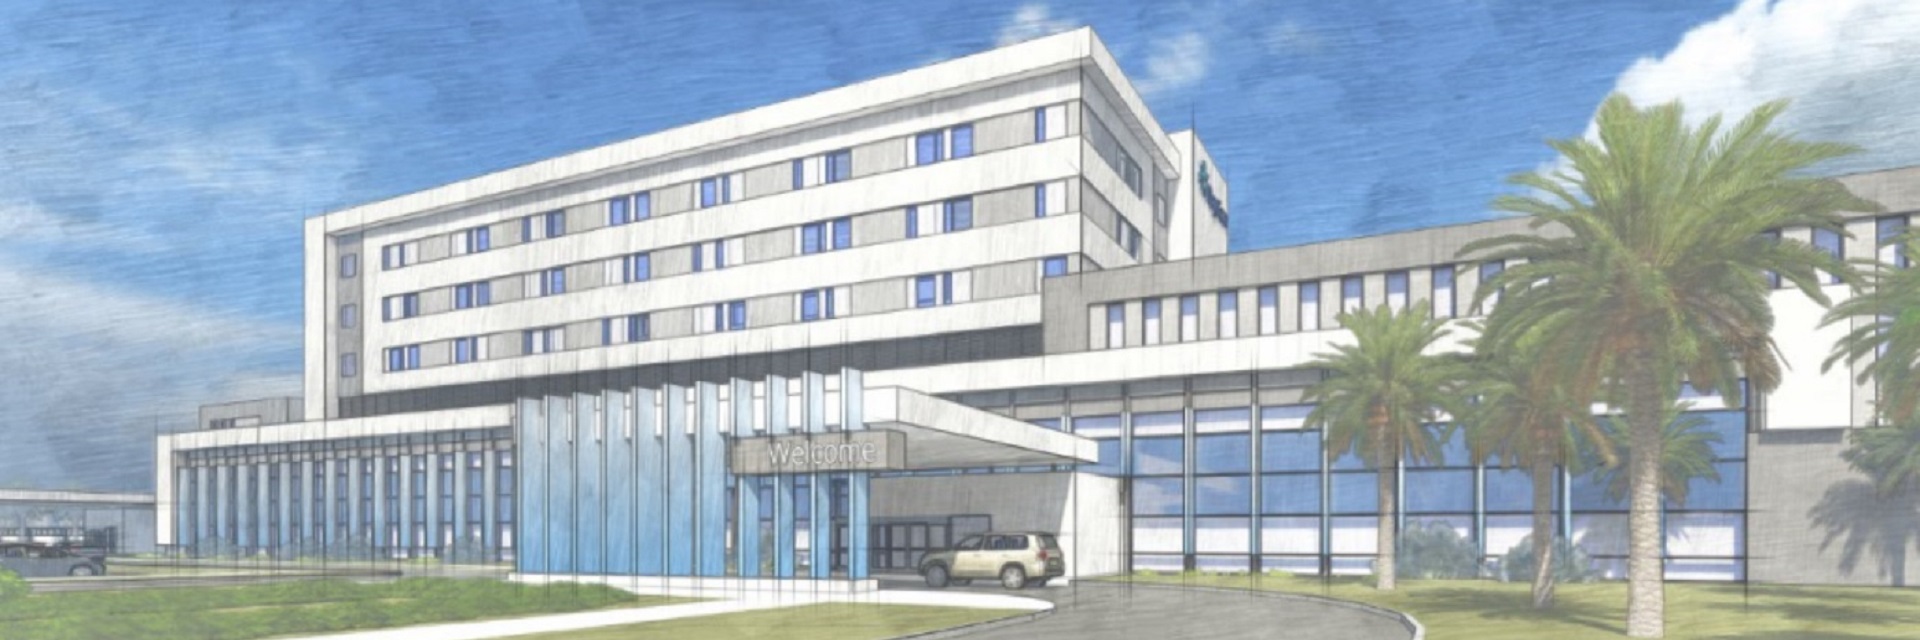 Artist's rendering of the new BayCare hospital that will be built in Wesley Chapel, Florida